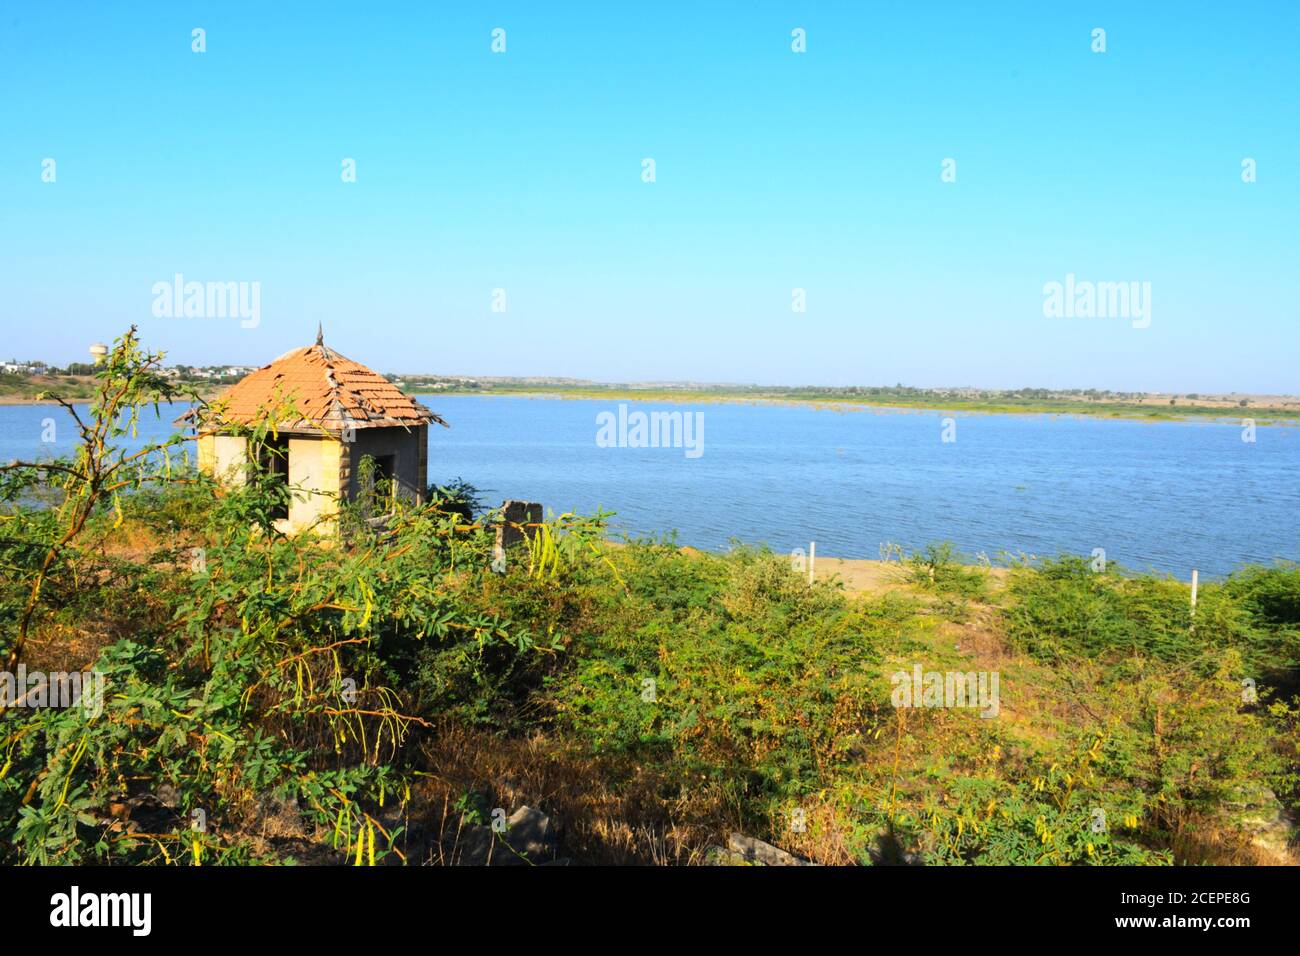 Hut on banks of the river of India, old hut, Little old house on banks of the river at sunset in silence Stock Photo